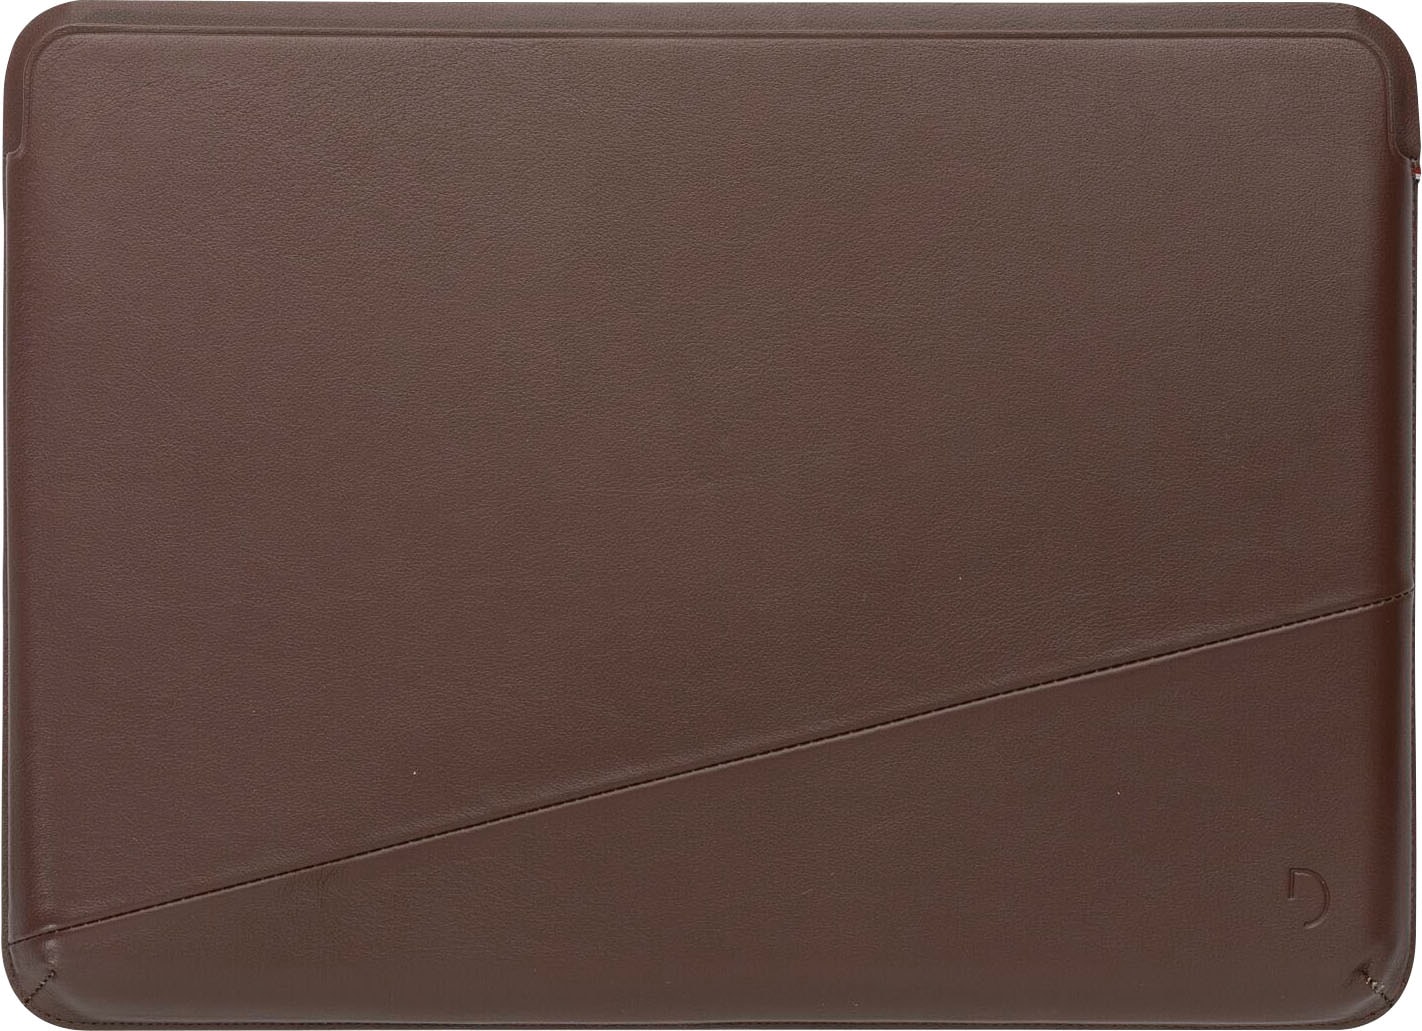 Laptop-Hülle »Leather Frame Sleeve for Macbook 16 inch«, MacBook 16-Zoll...